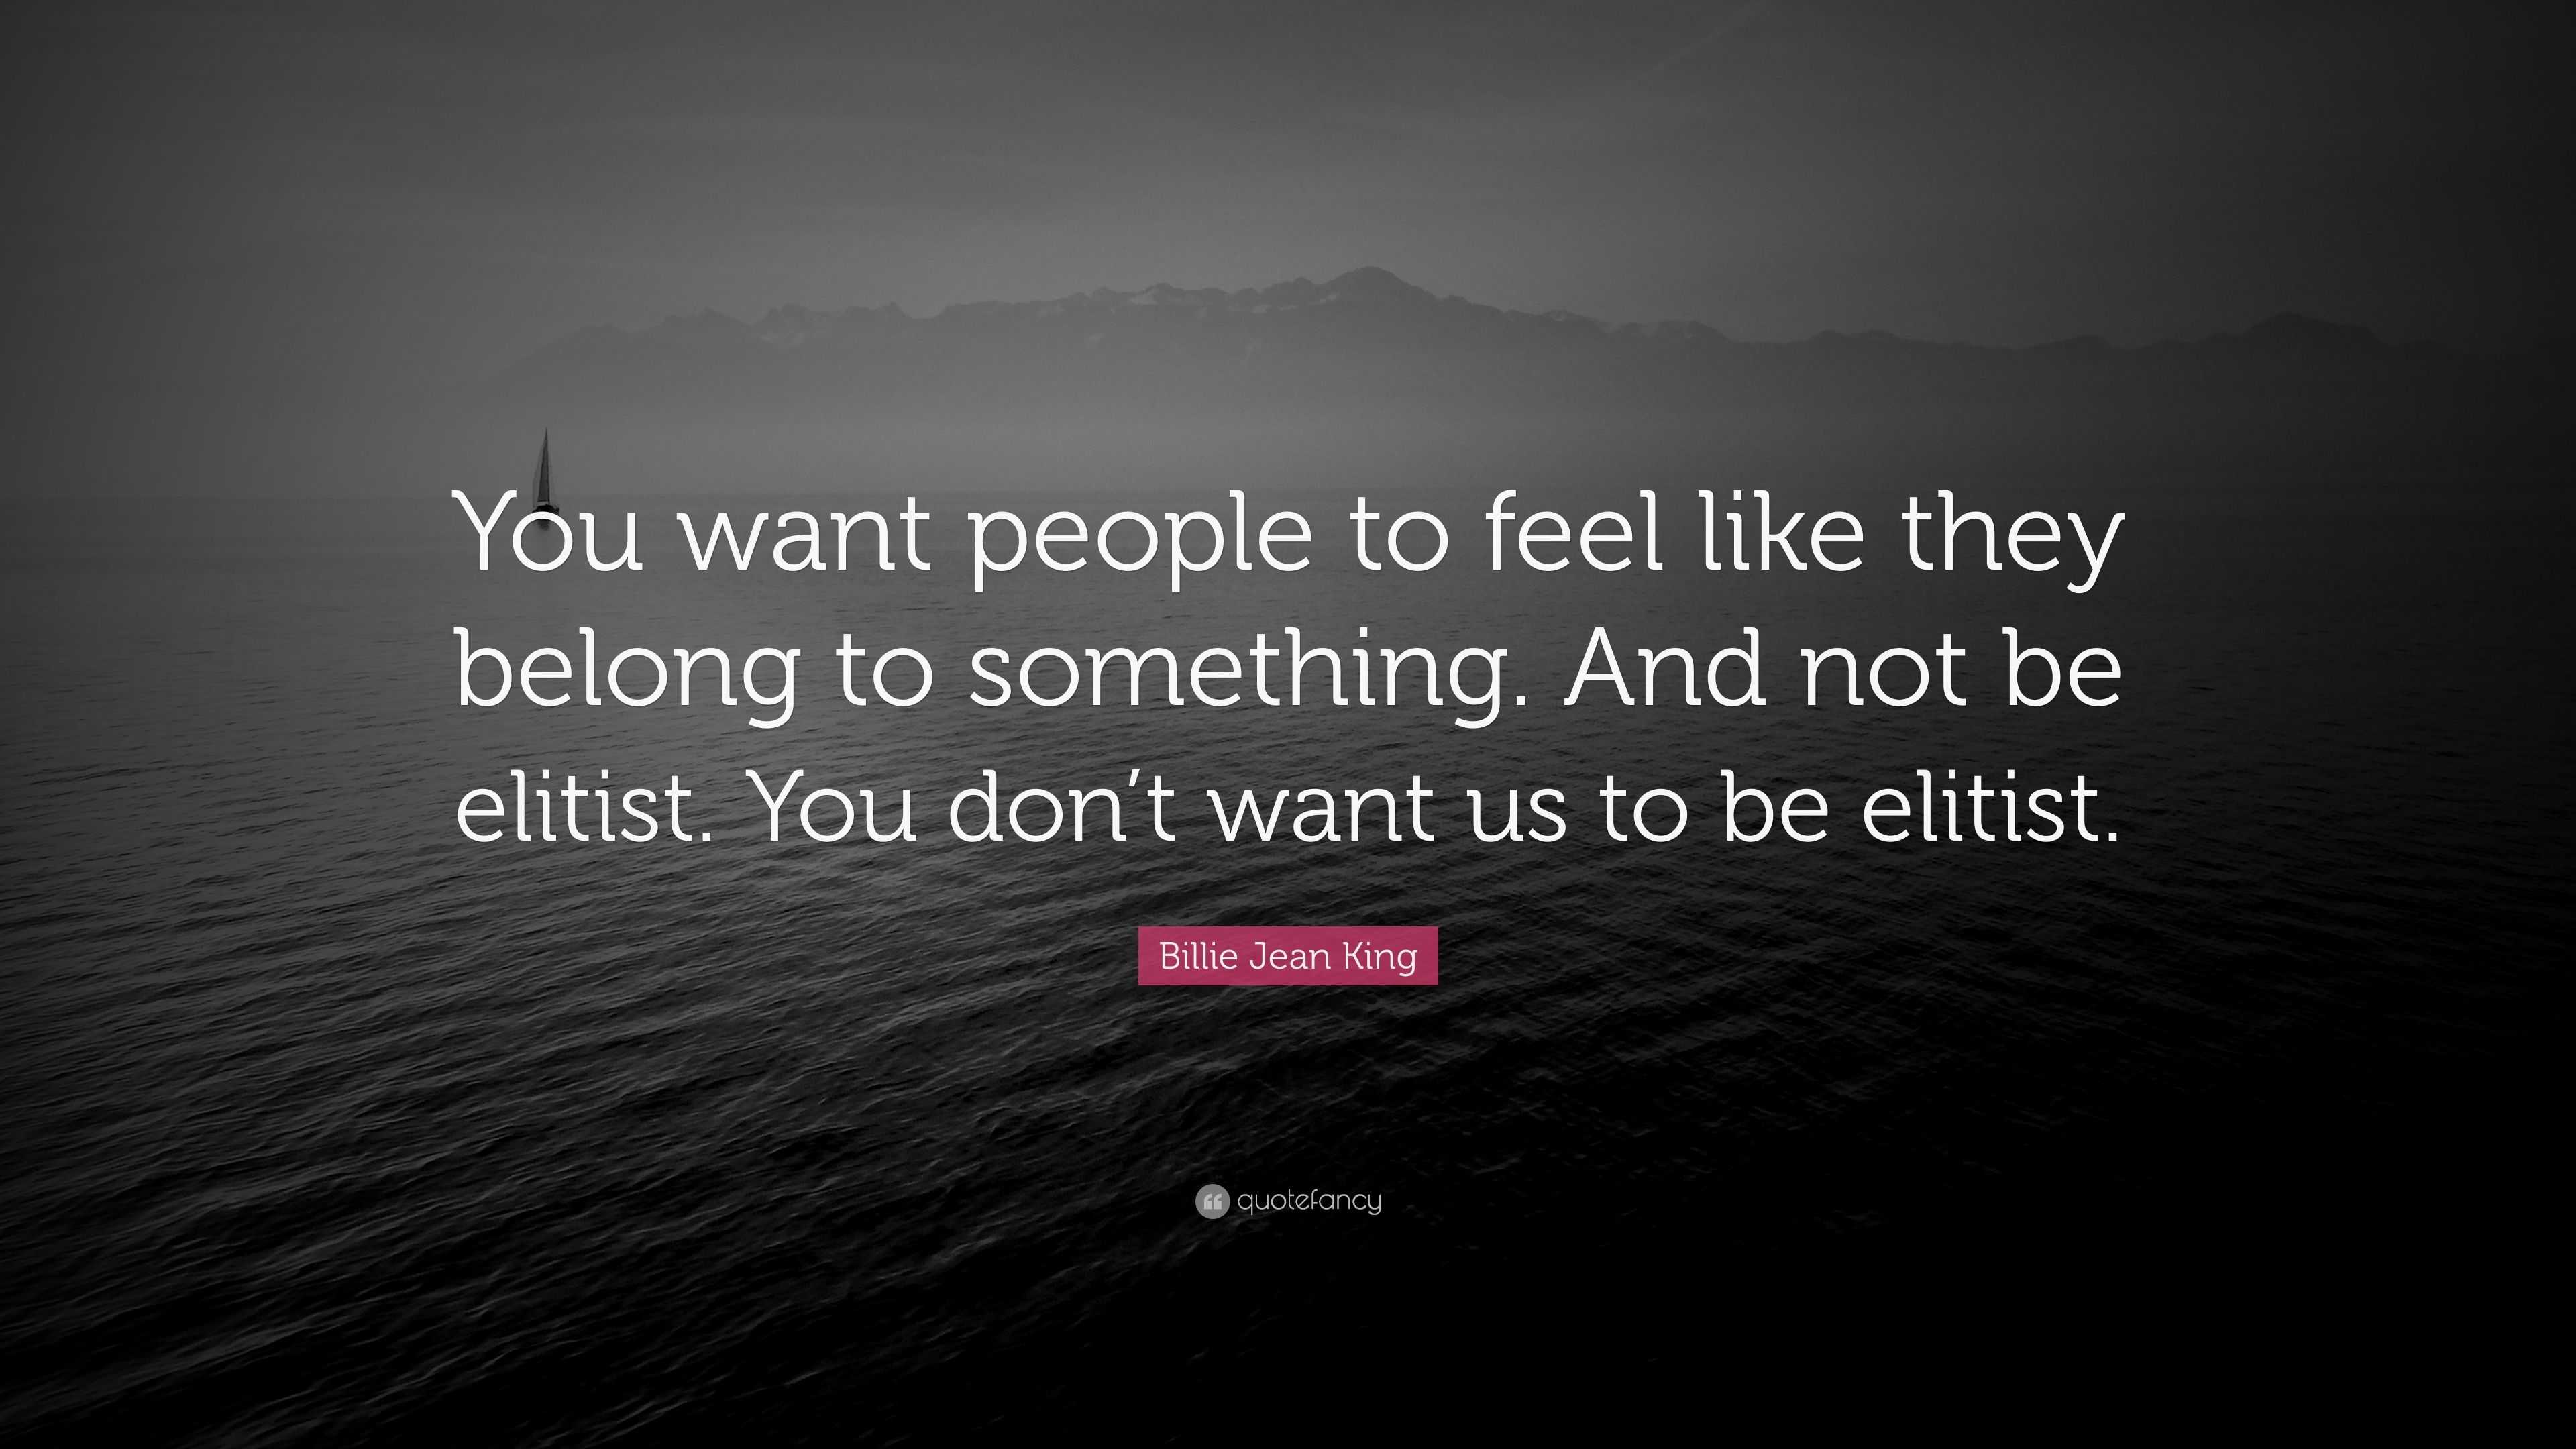 Billie Jean King Quote: “You want people to feel like they belong to ...